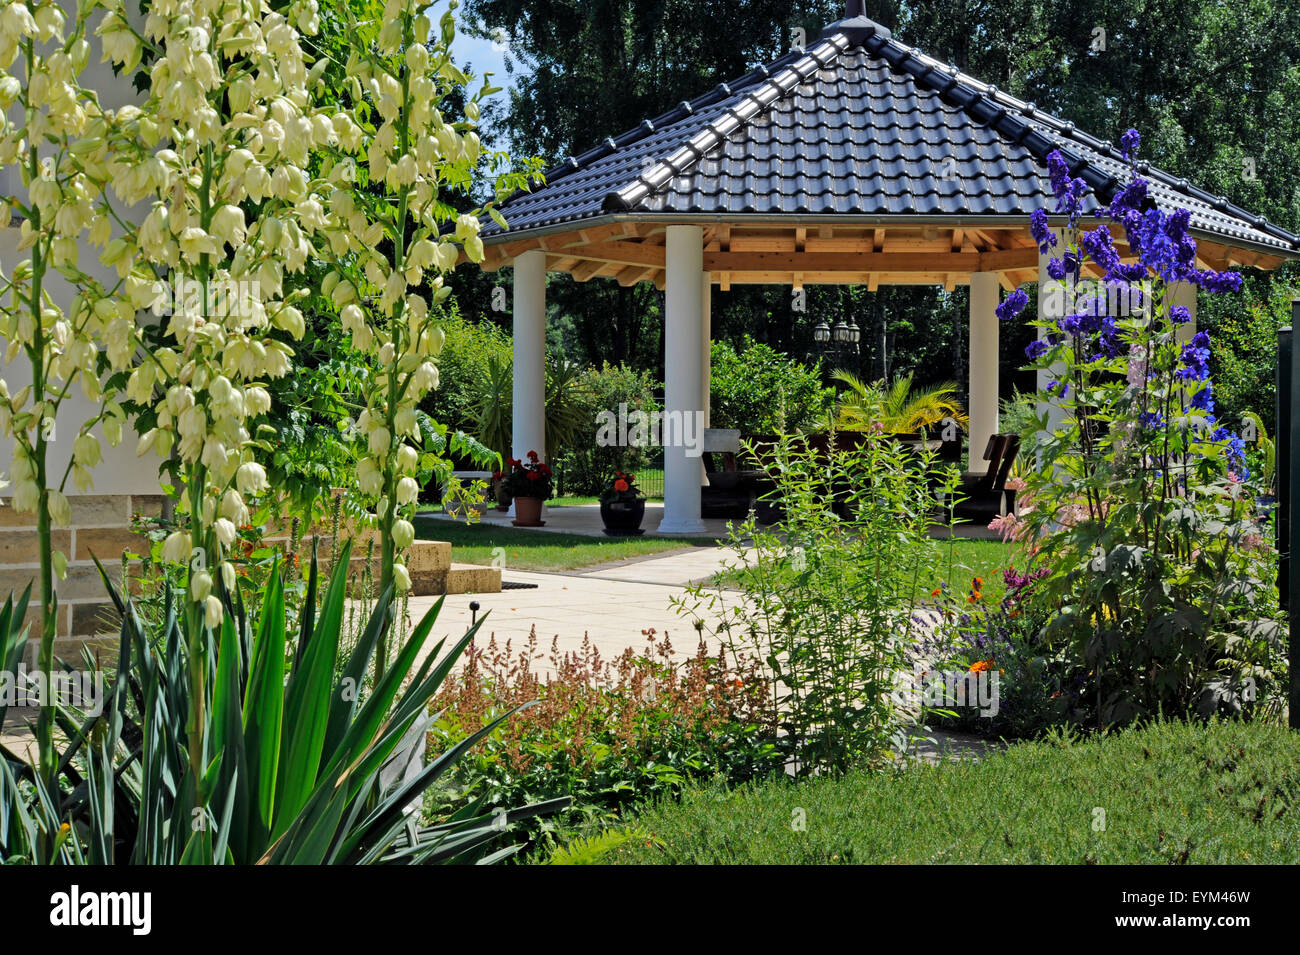 Romantic country house garden with attractive jewellery shrubs, yucca, larkspur, garden pavilion, Stock Photo